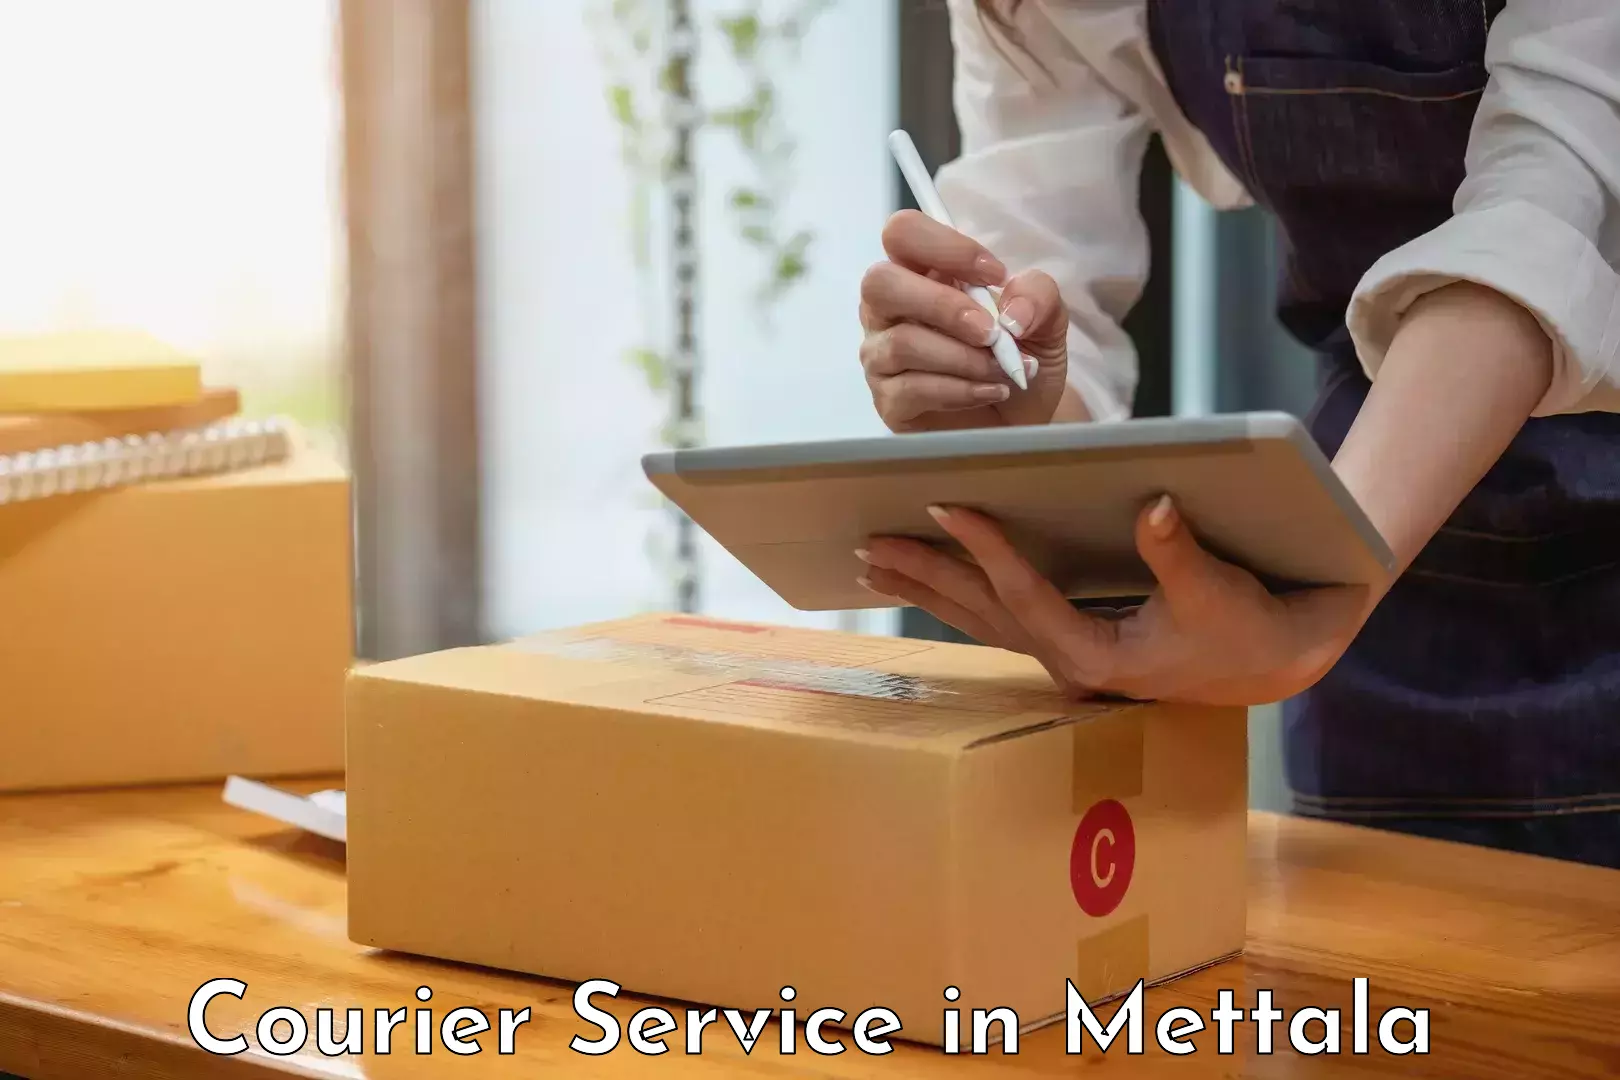 Flexible delivery scheduling in Mettala